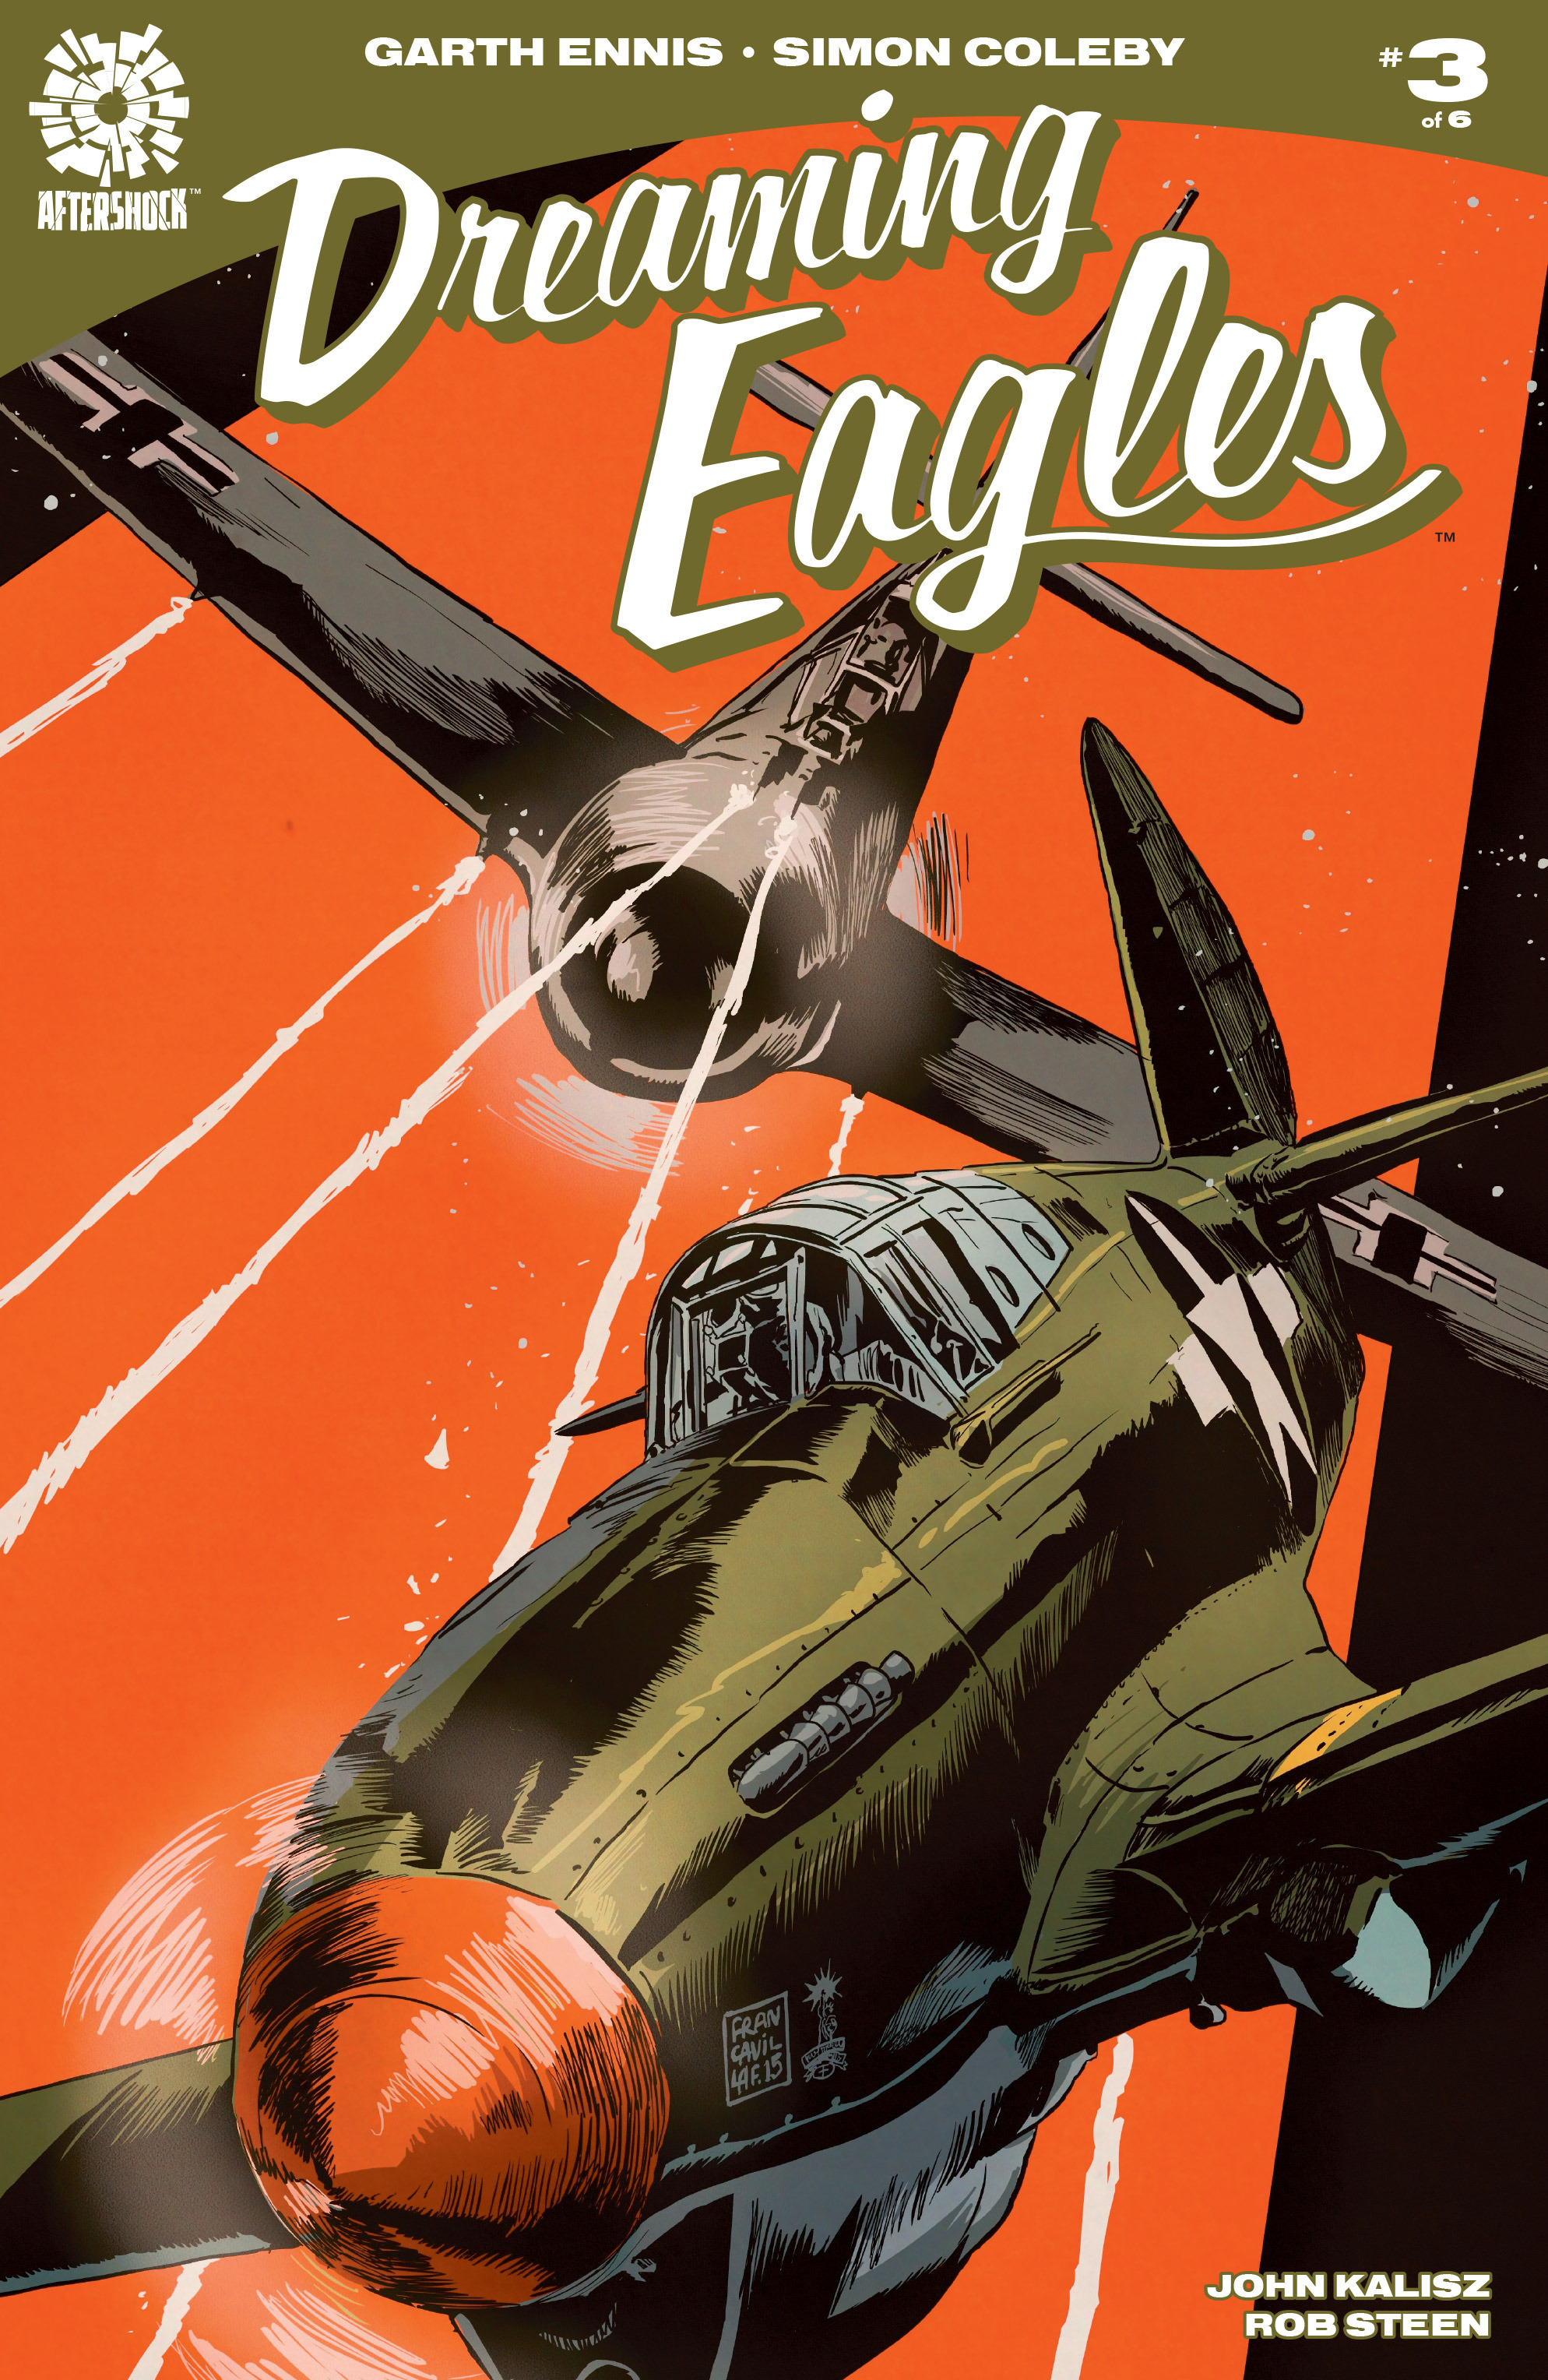 Read online Dreaming Eagles comic -  Issue #3 - 1